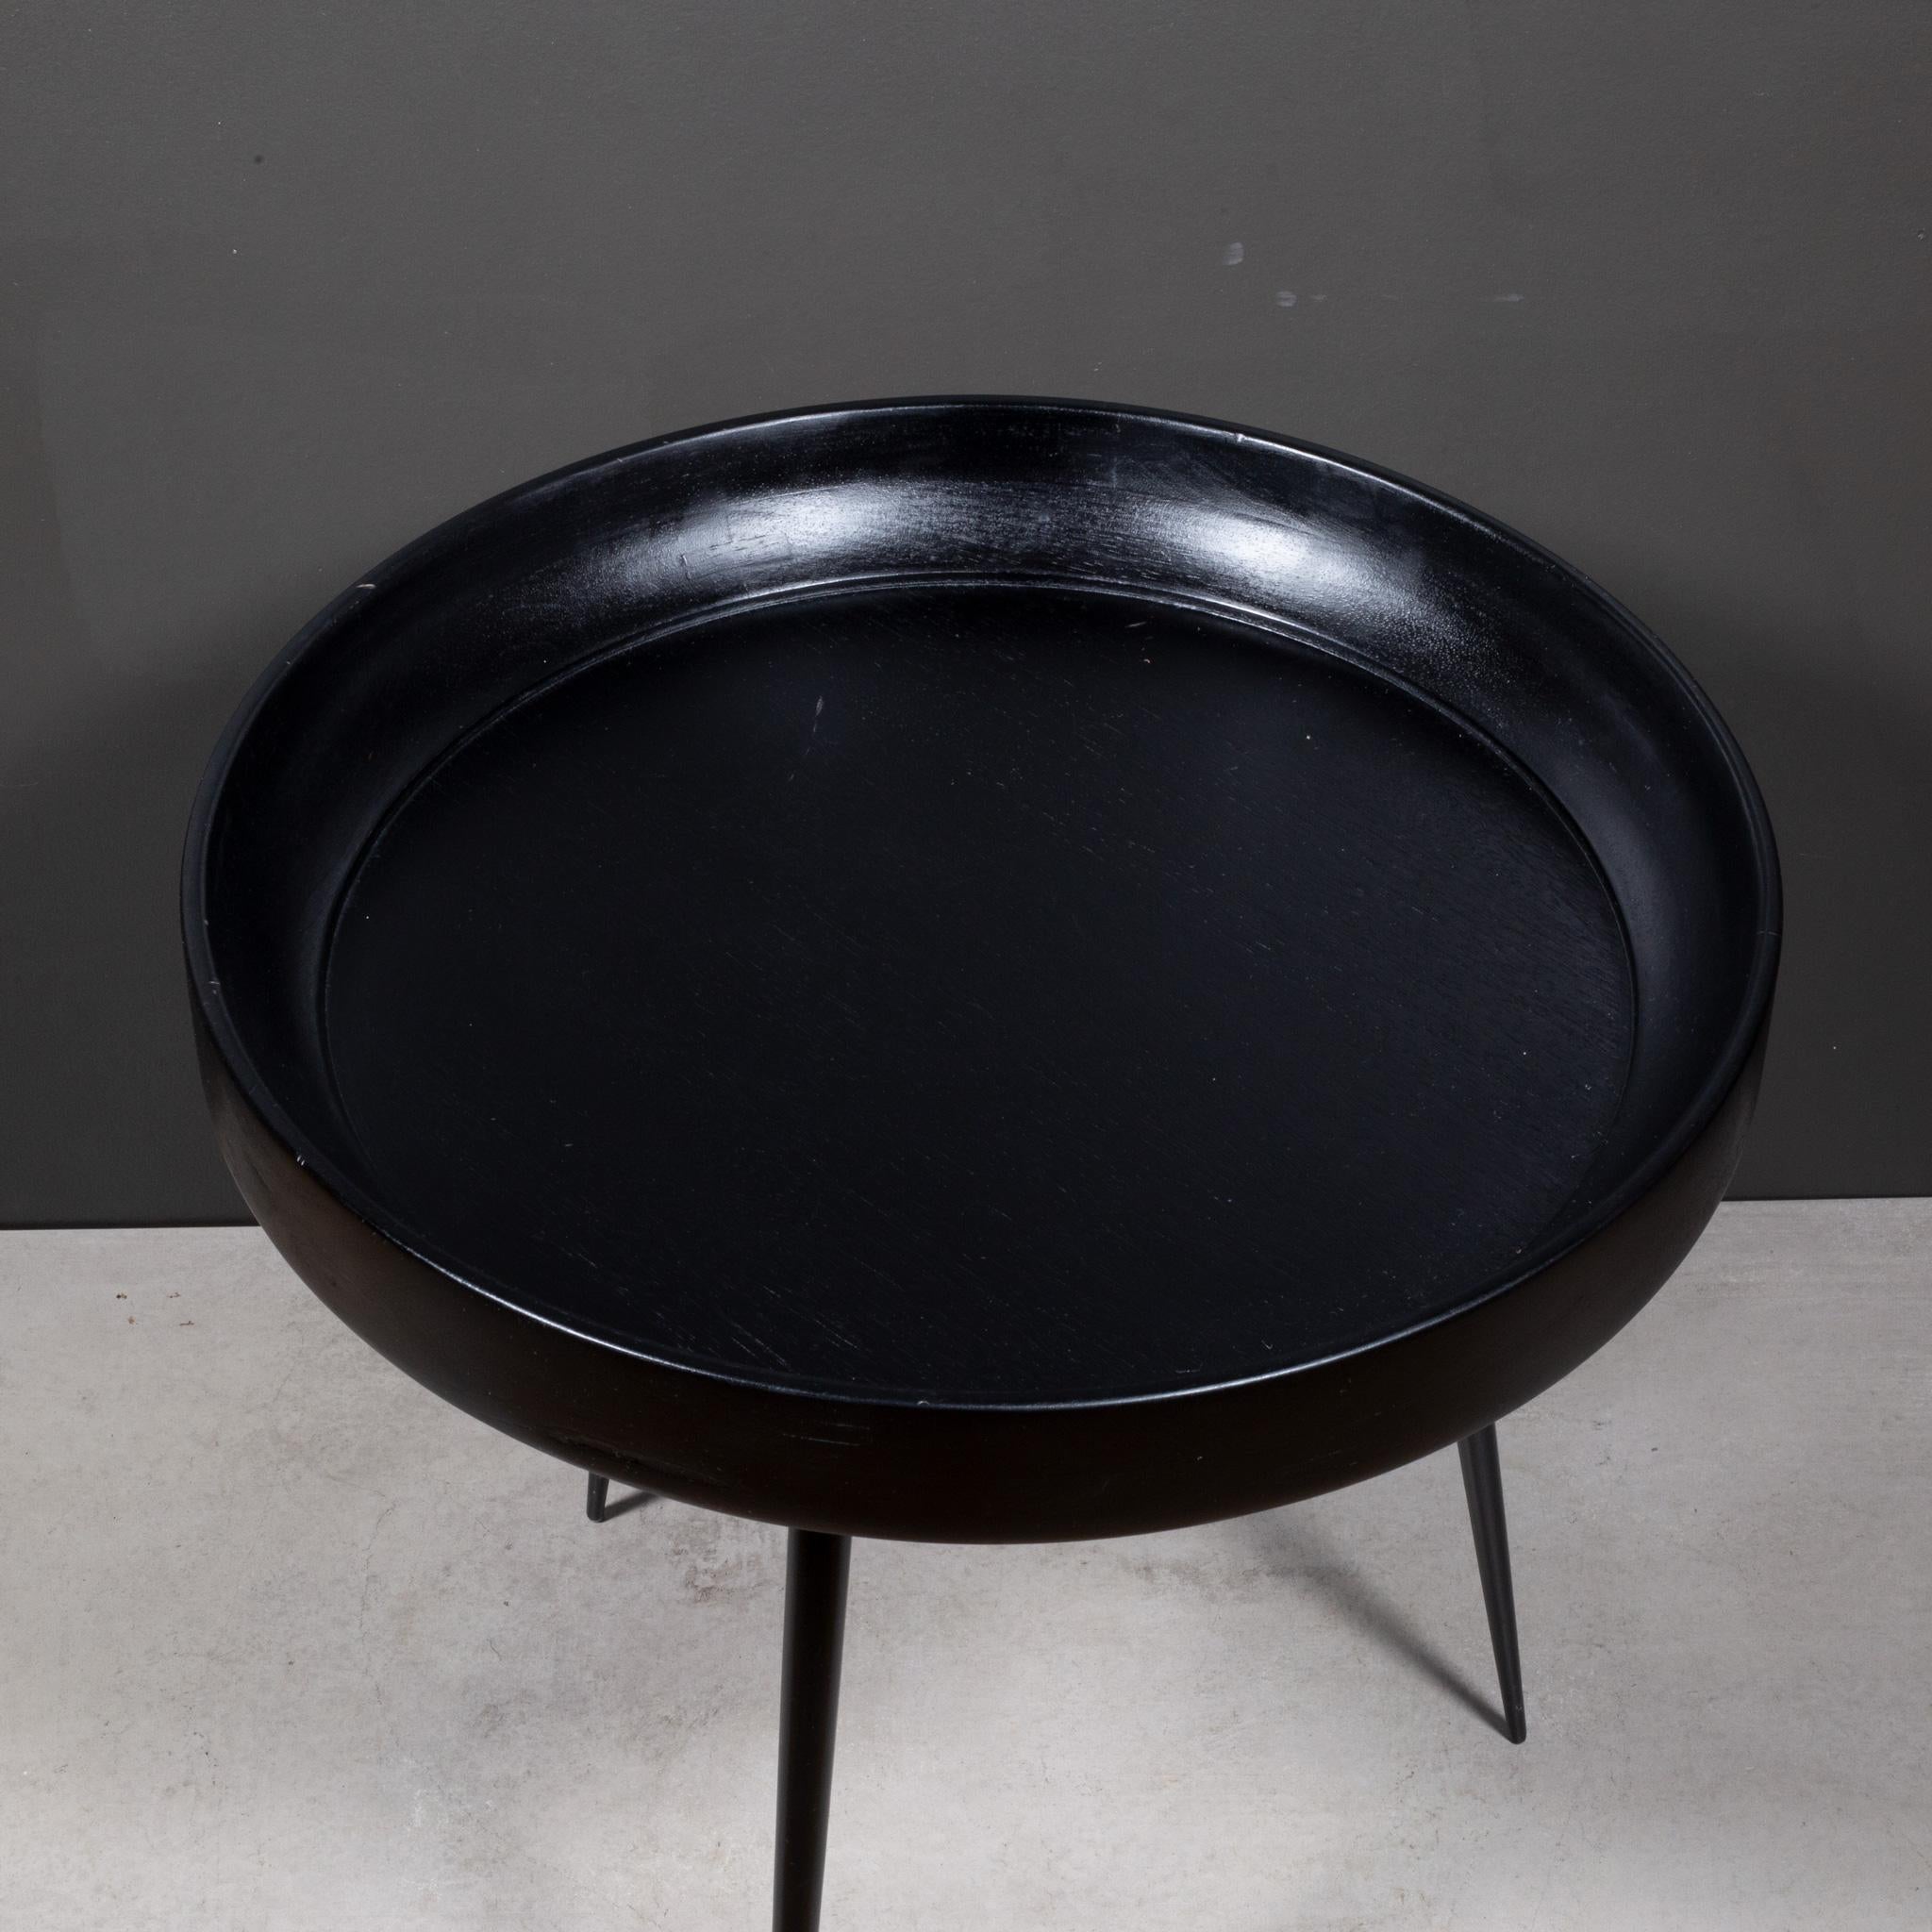 ABOUT

This will ship parcel flat pack. Please contact us for a shipping quote: 
S16 Home San Francisco. 

Experience the timeless beauty of the Bowl Table from Mater, a unique blend of Indian craftsmanship and Scandinavian design. Its sustainably